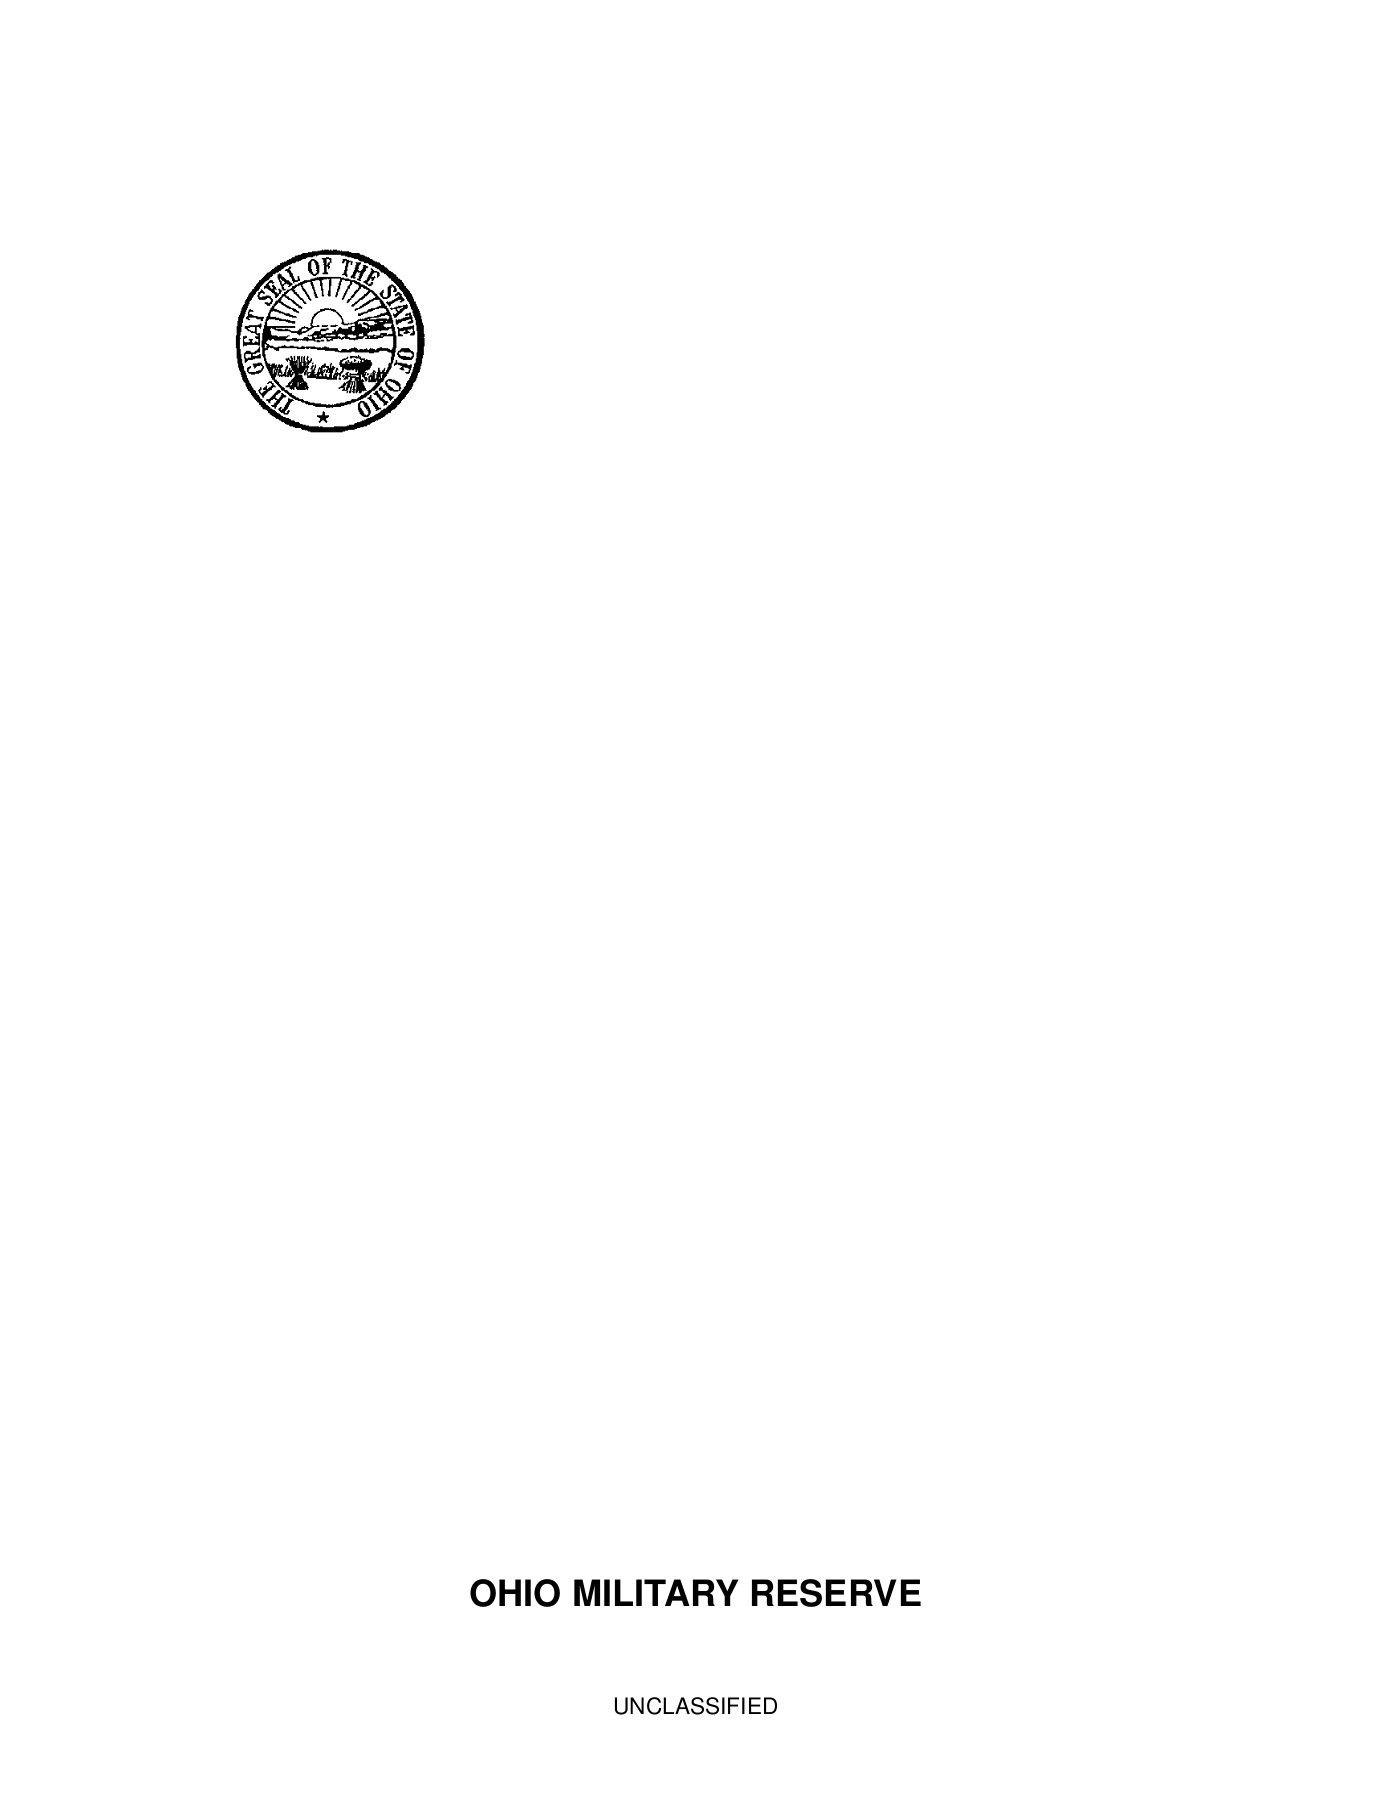 OHMR Logo - UNCLASSIFIED Military Reserve Pages 1 Version